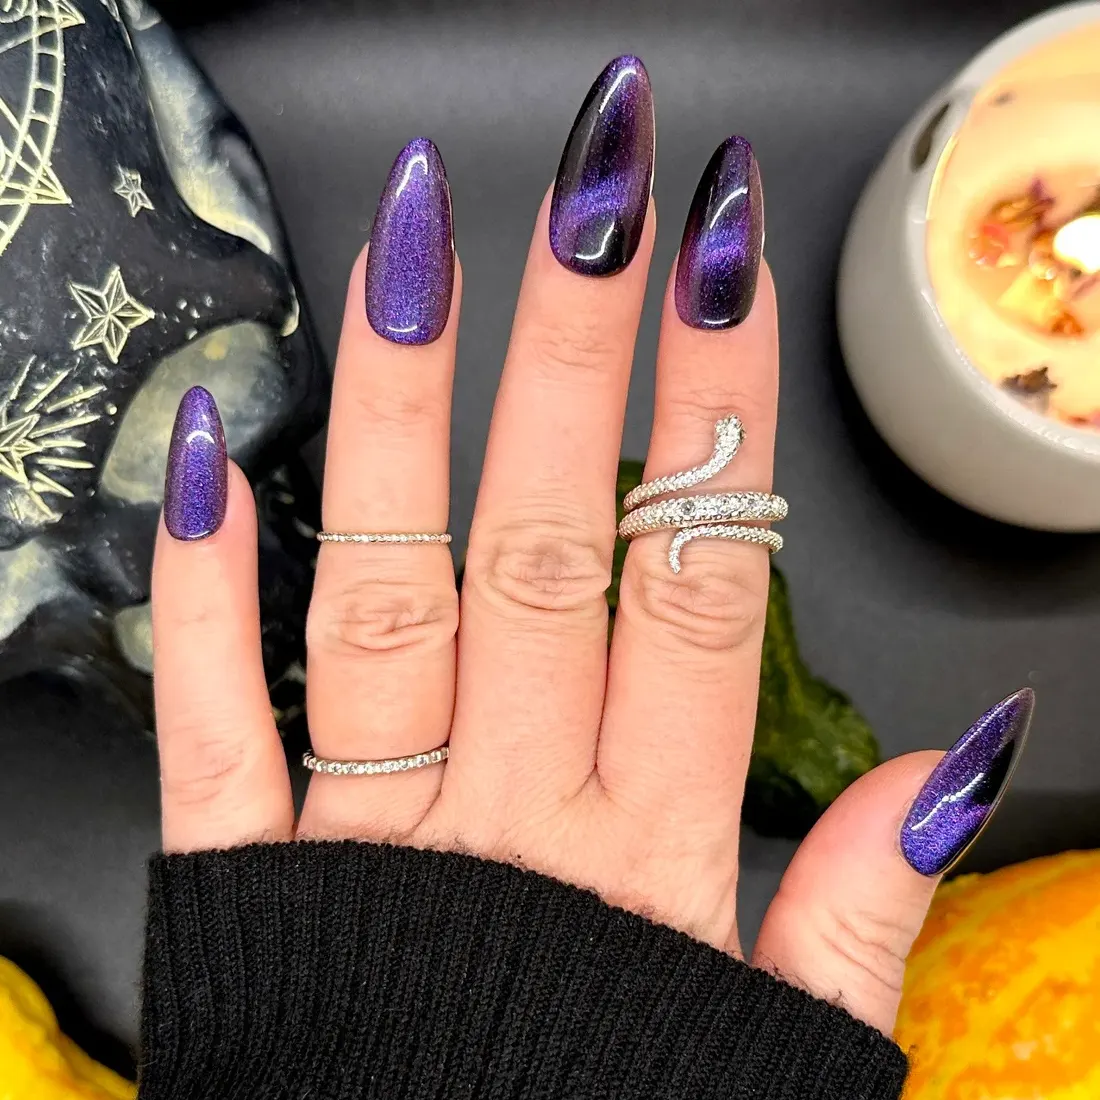 Closeup of hand with sparkly purple nail polish in a "cat eye" design | 9 Witchy Nail Designs You Can Buy as Press-Ons on Etsy | Slashed Beauty